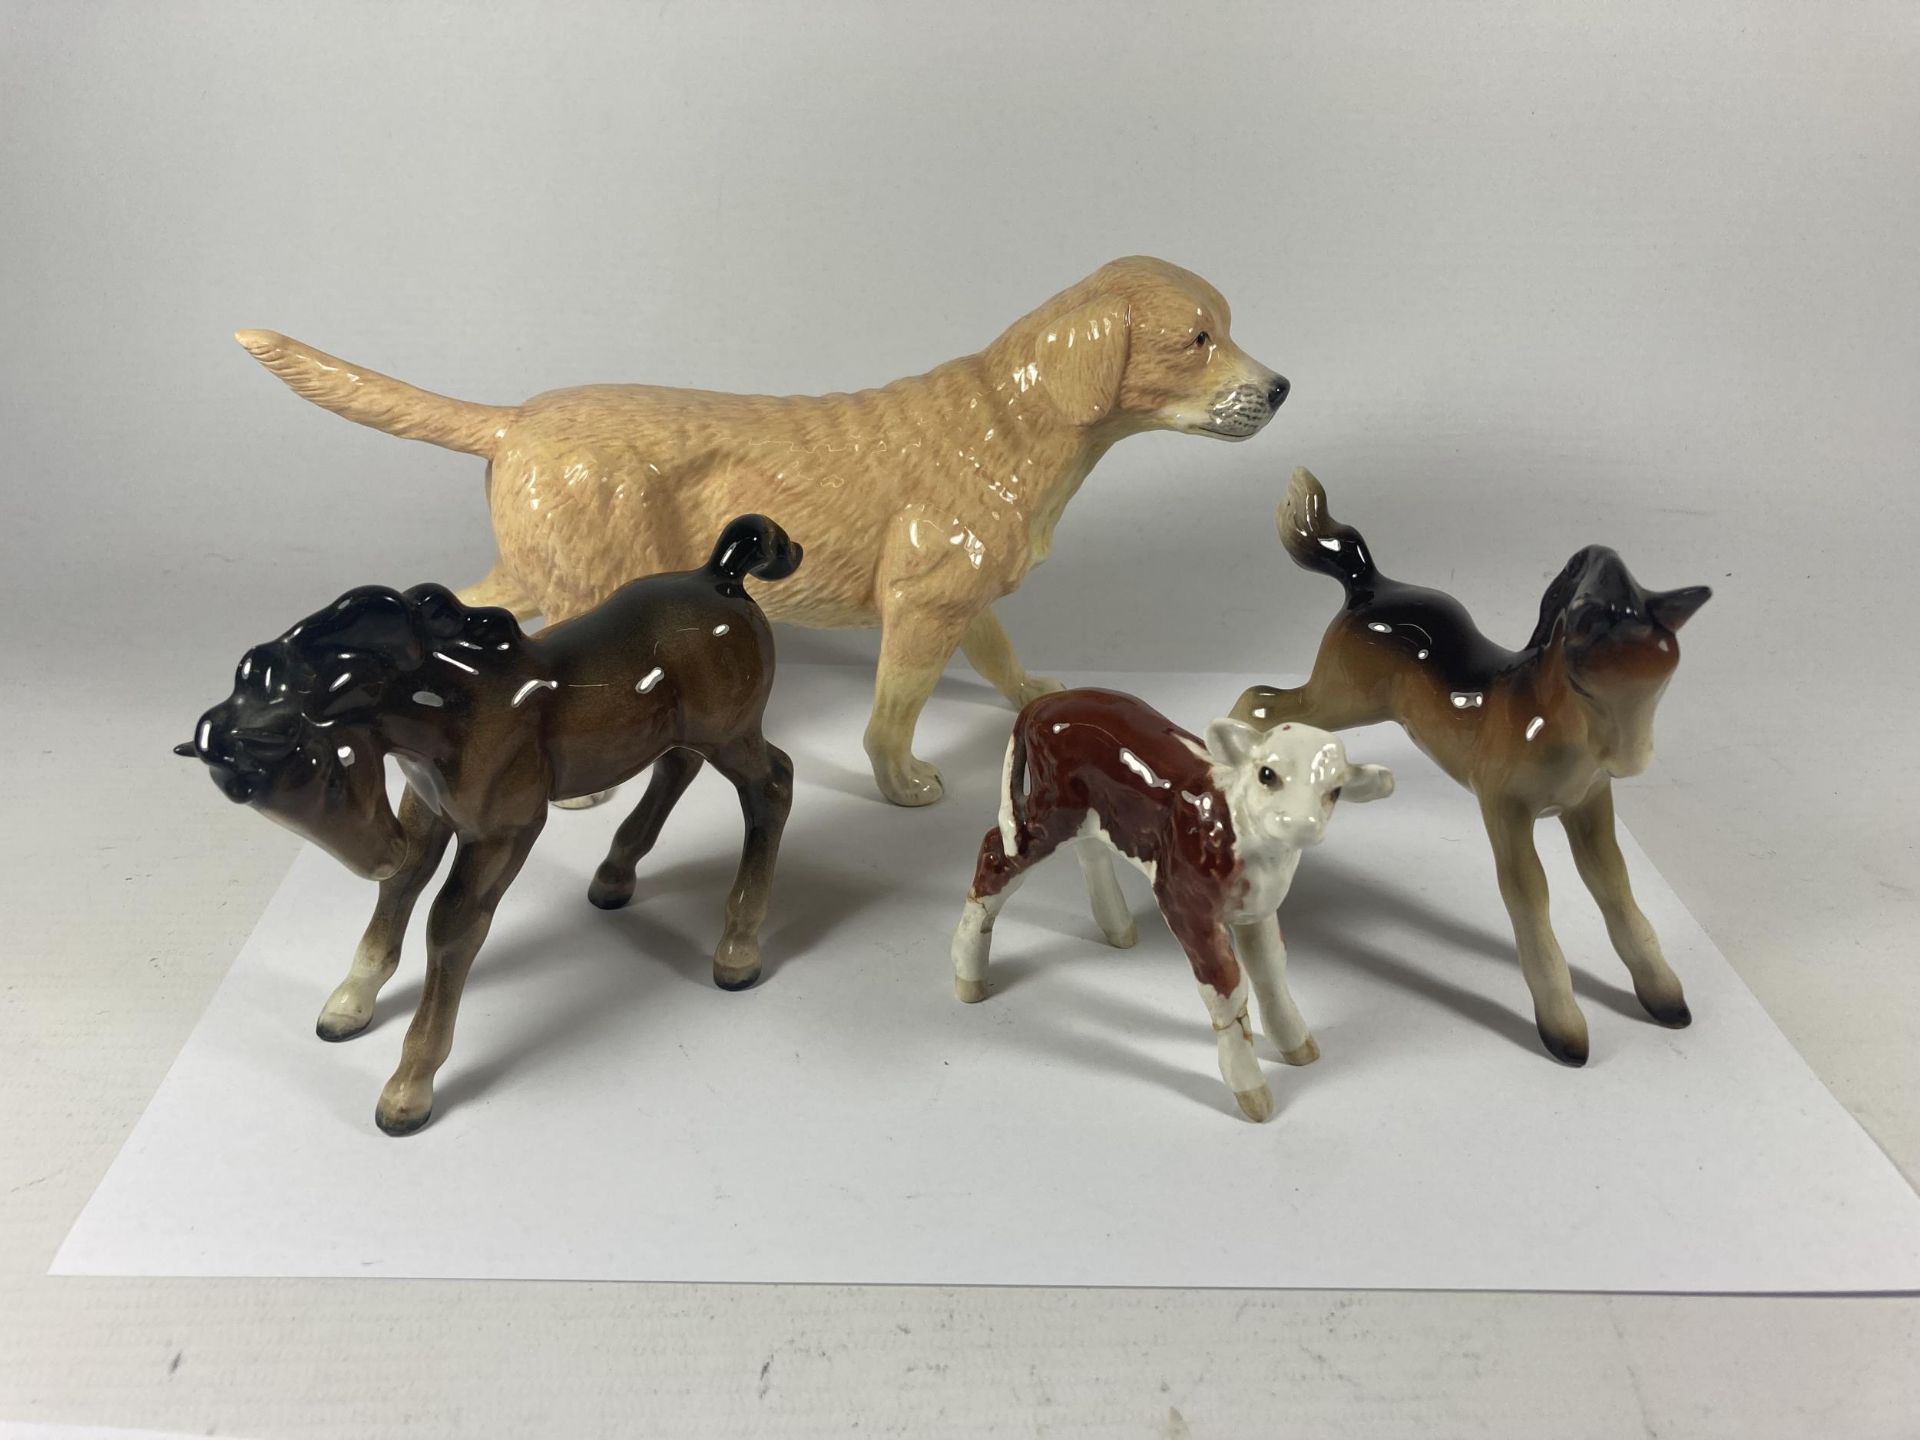 FOUR CERAMIC ANIMALS TO INCLUDE A ROYAL DOULTON RETRIEVER, A BESWICK FOAL, MIDWINTER FOAL AND A